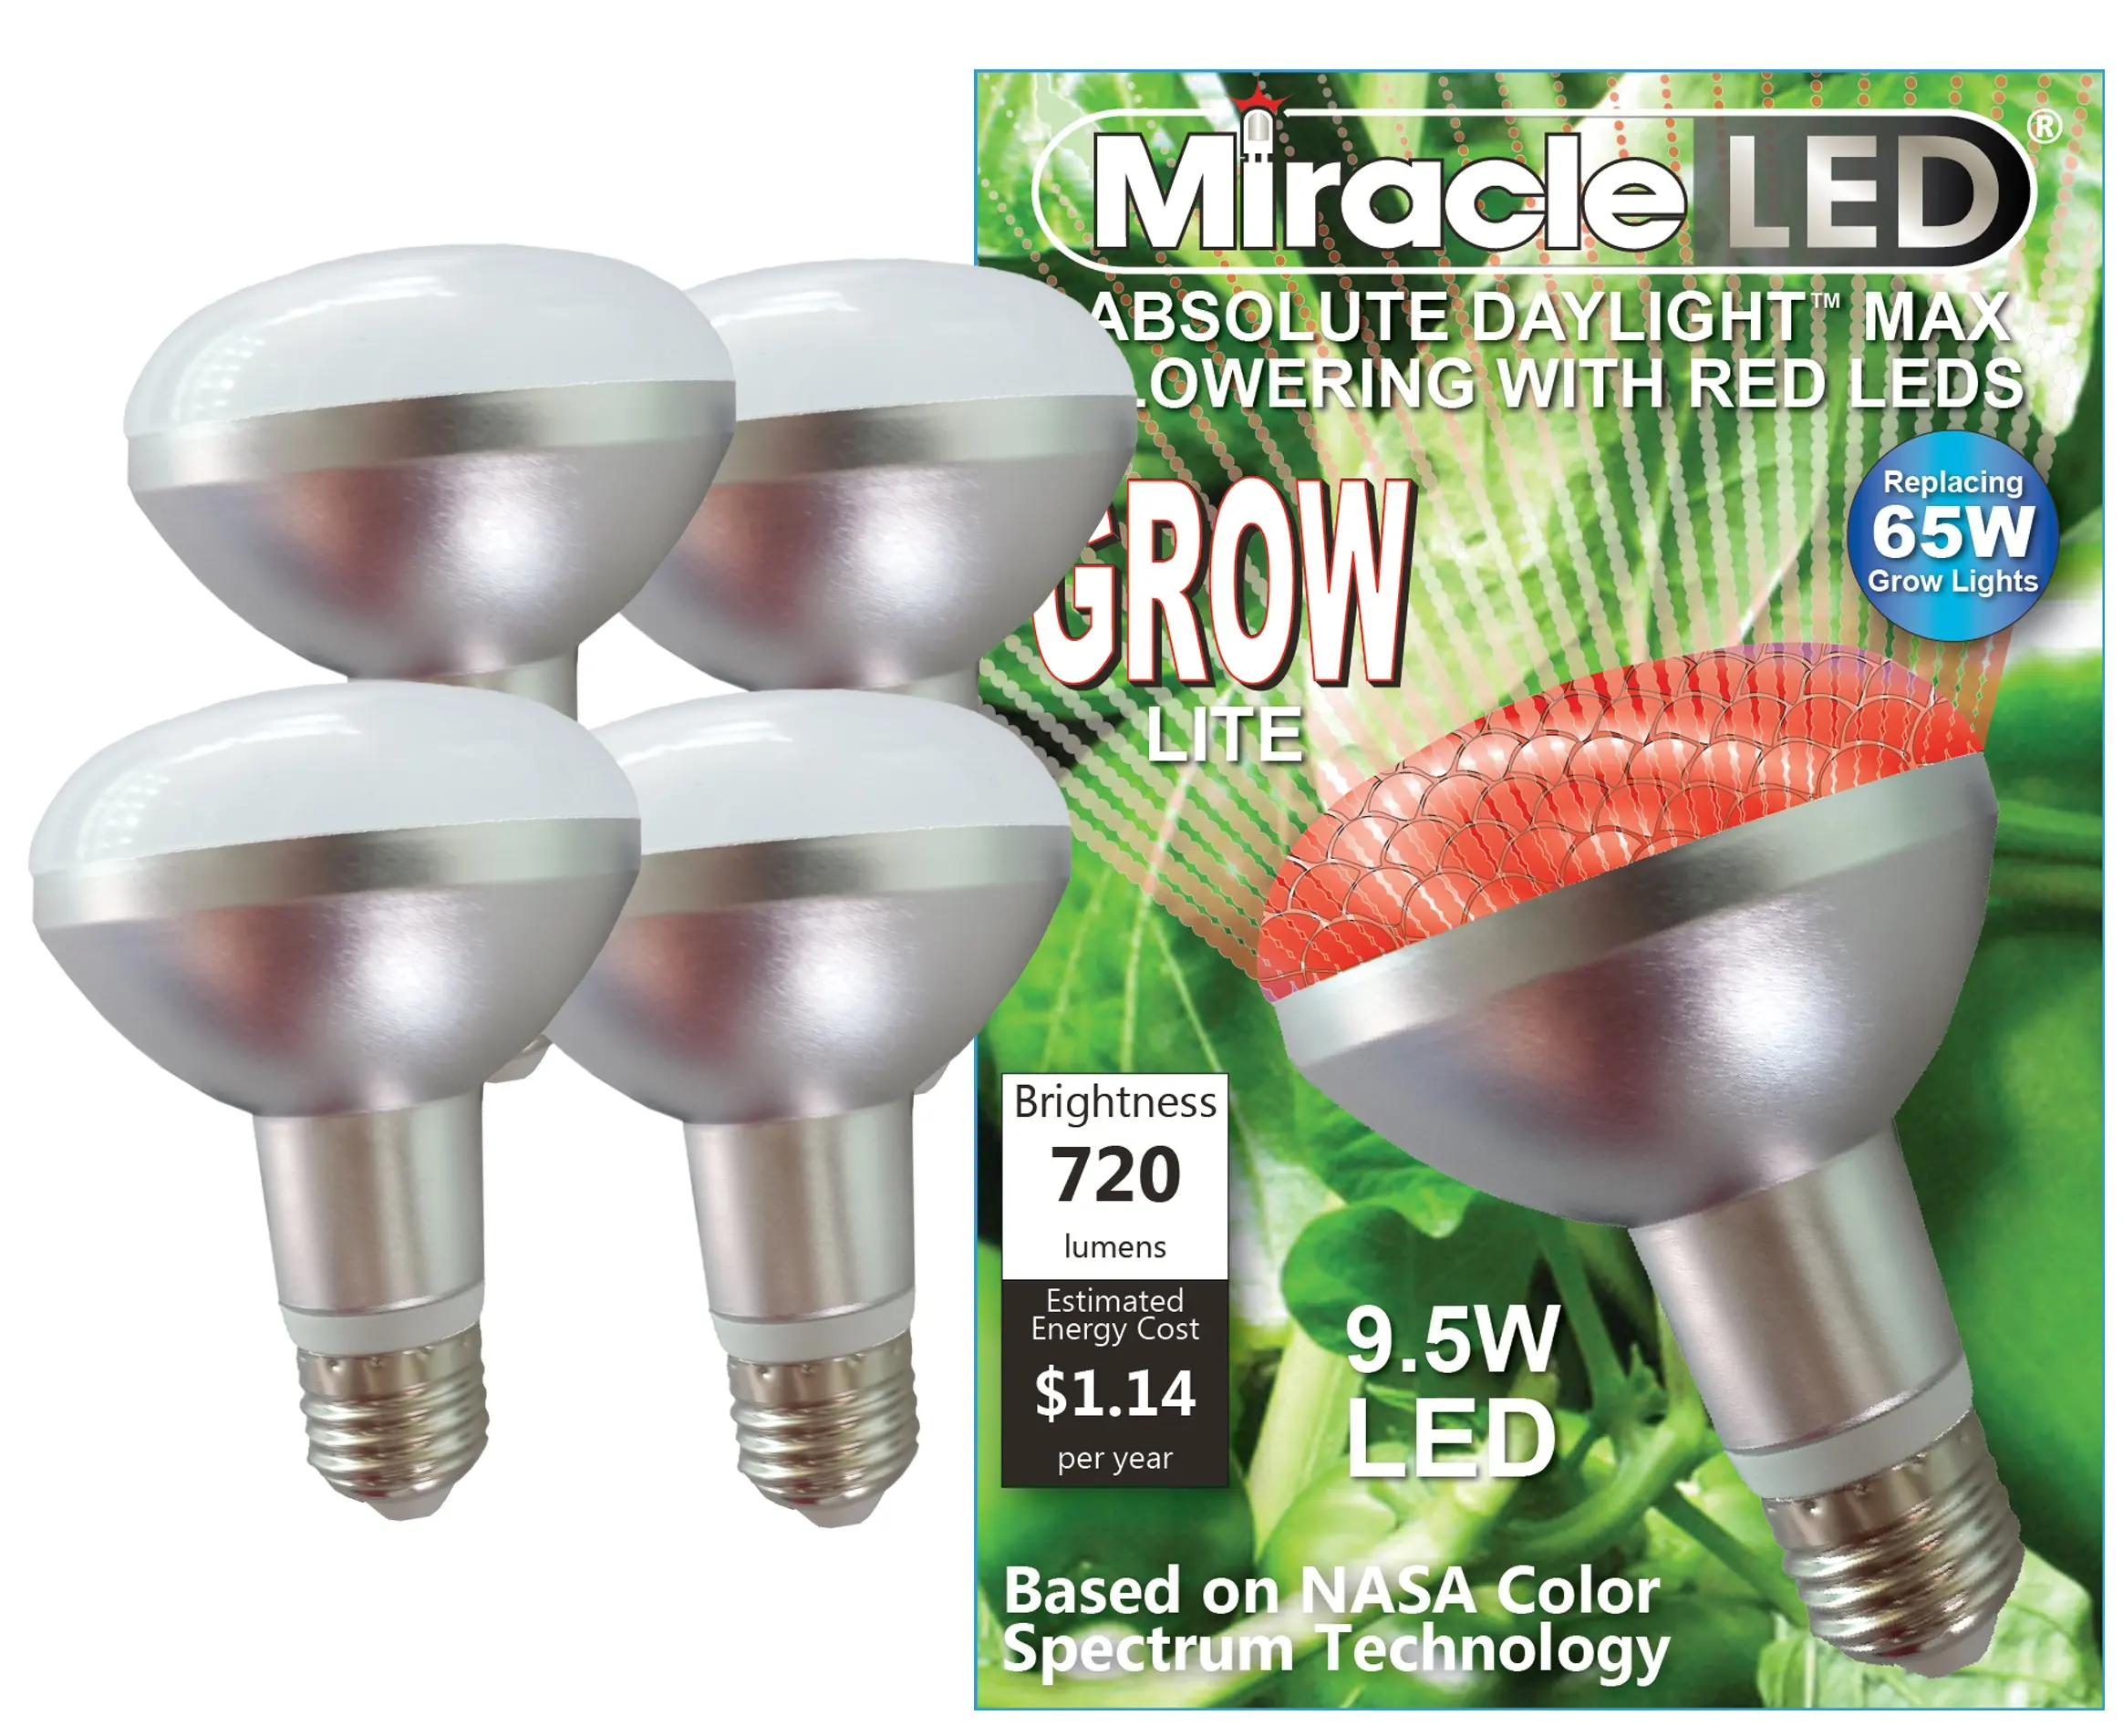 Buy Miracle LED Absolute Daylight MAX Flowering Grow Light ...